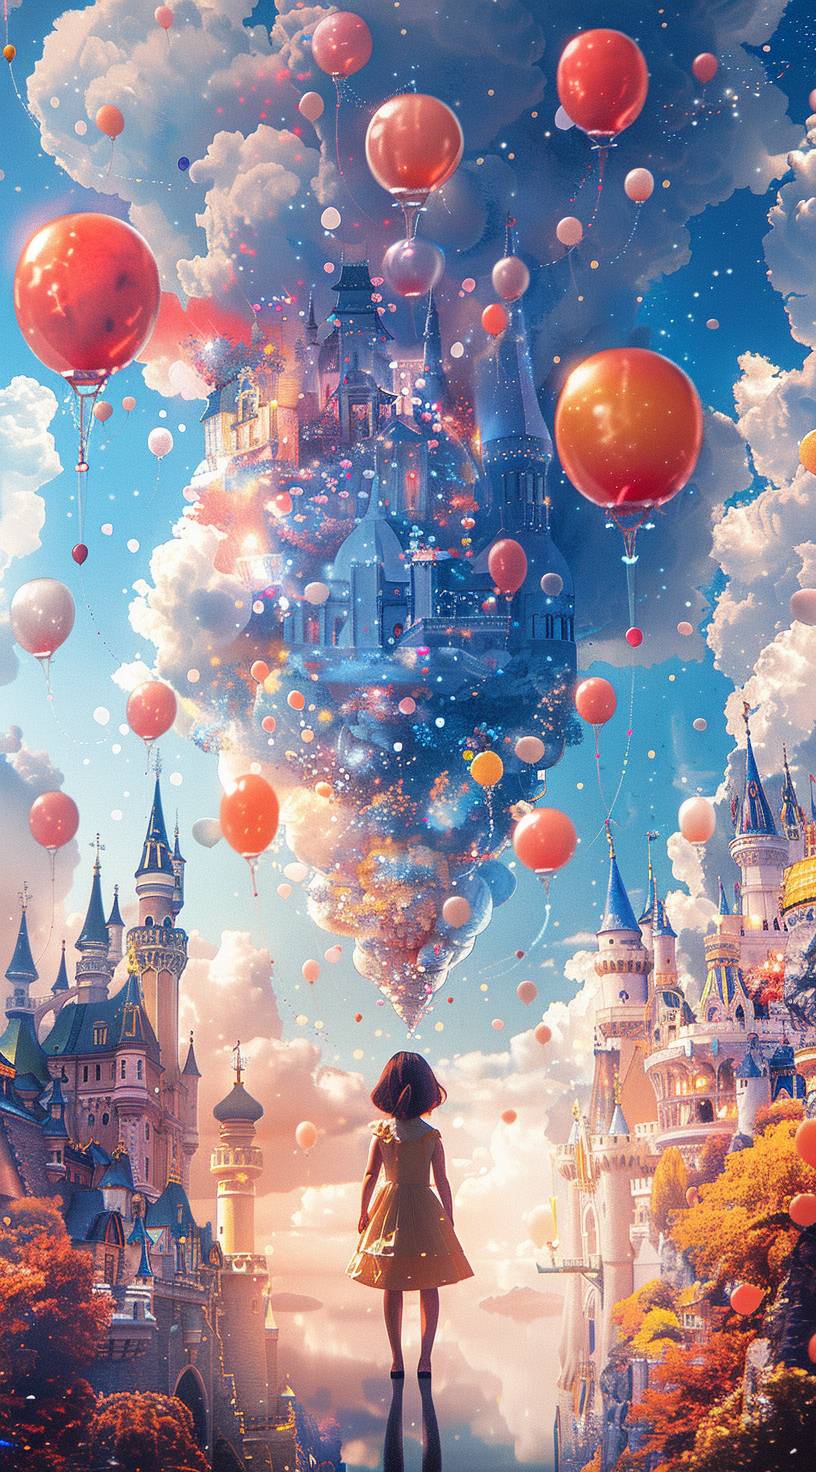 A girl in the center of an amusement park, surrounded by colorful balloons and soft pastel colors. The background features castles floating among many balloon flowers in the style of Disney. A child is standing on their tiptoes with their back to us, looking at all this beautiful scenery. This scene gives people a feeling that they can make their dreams come true. Highly detailed illustration.